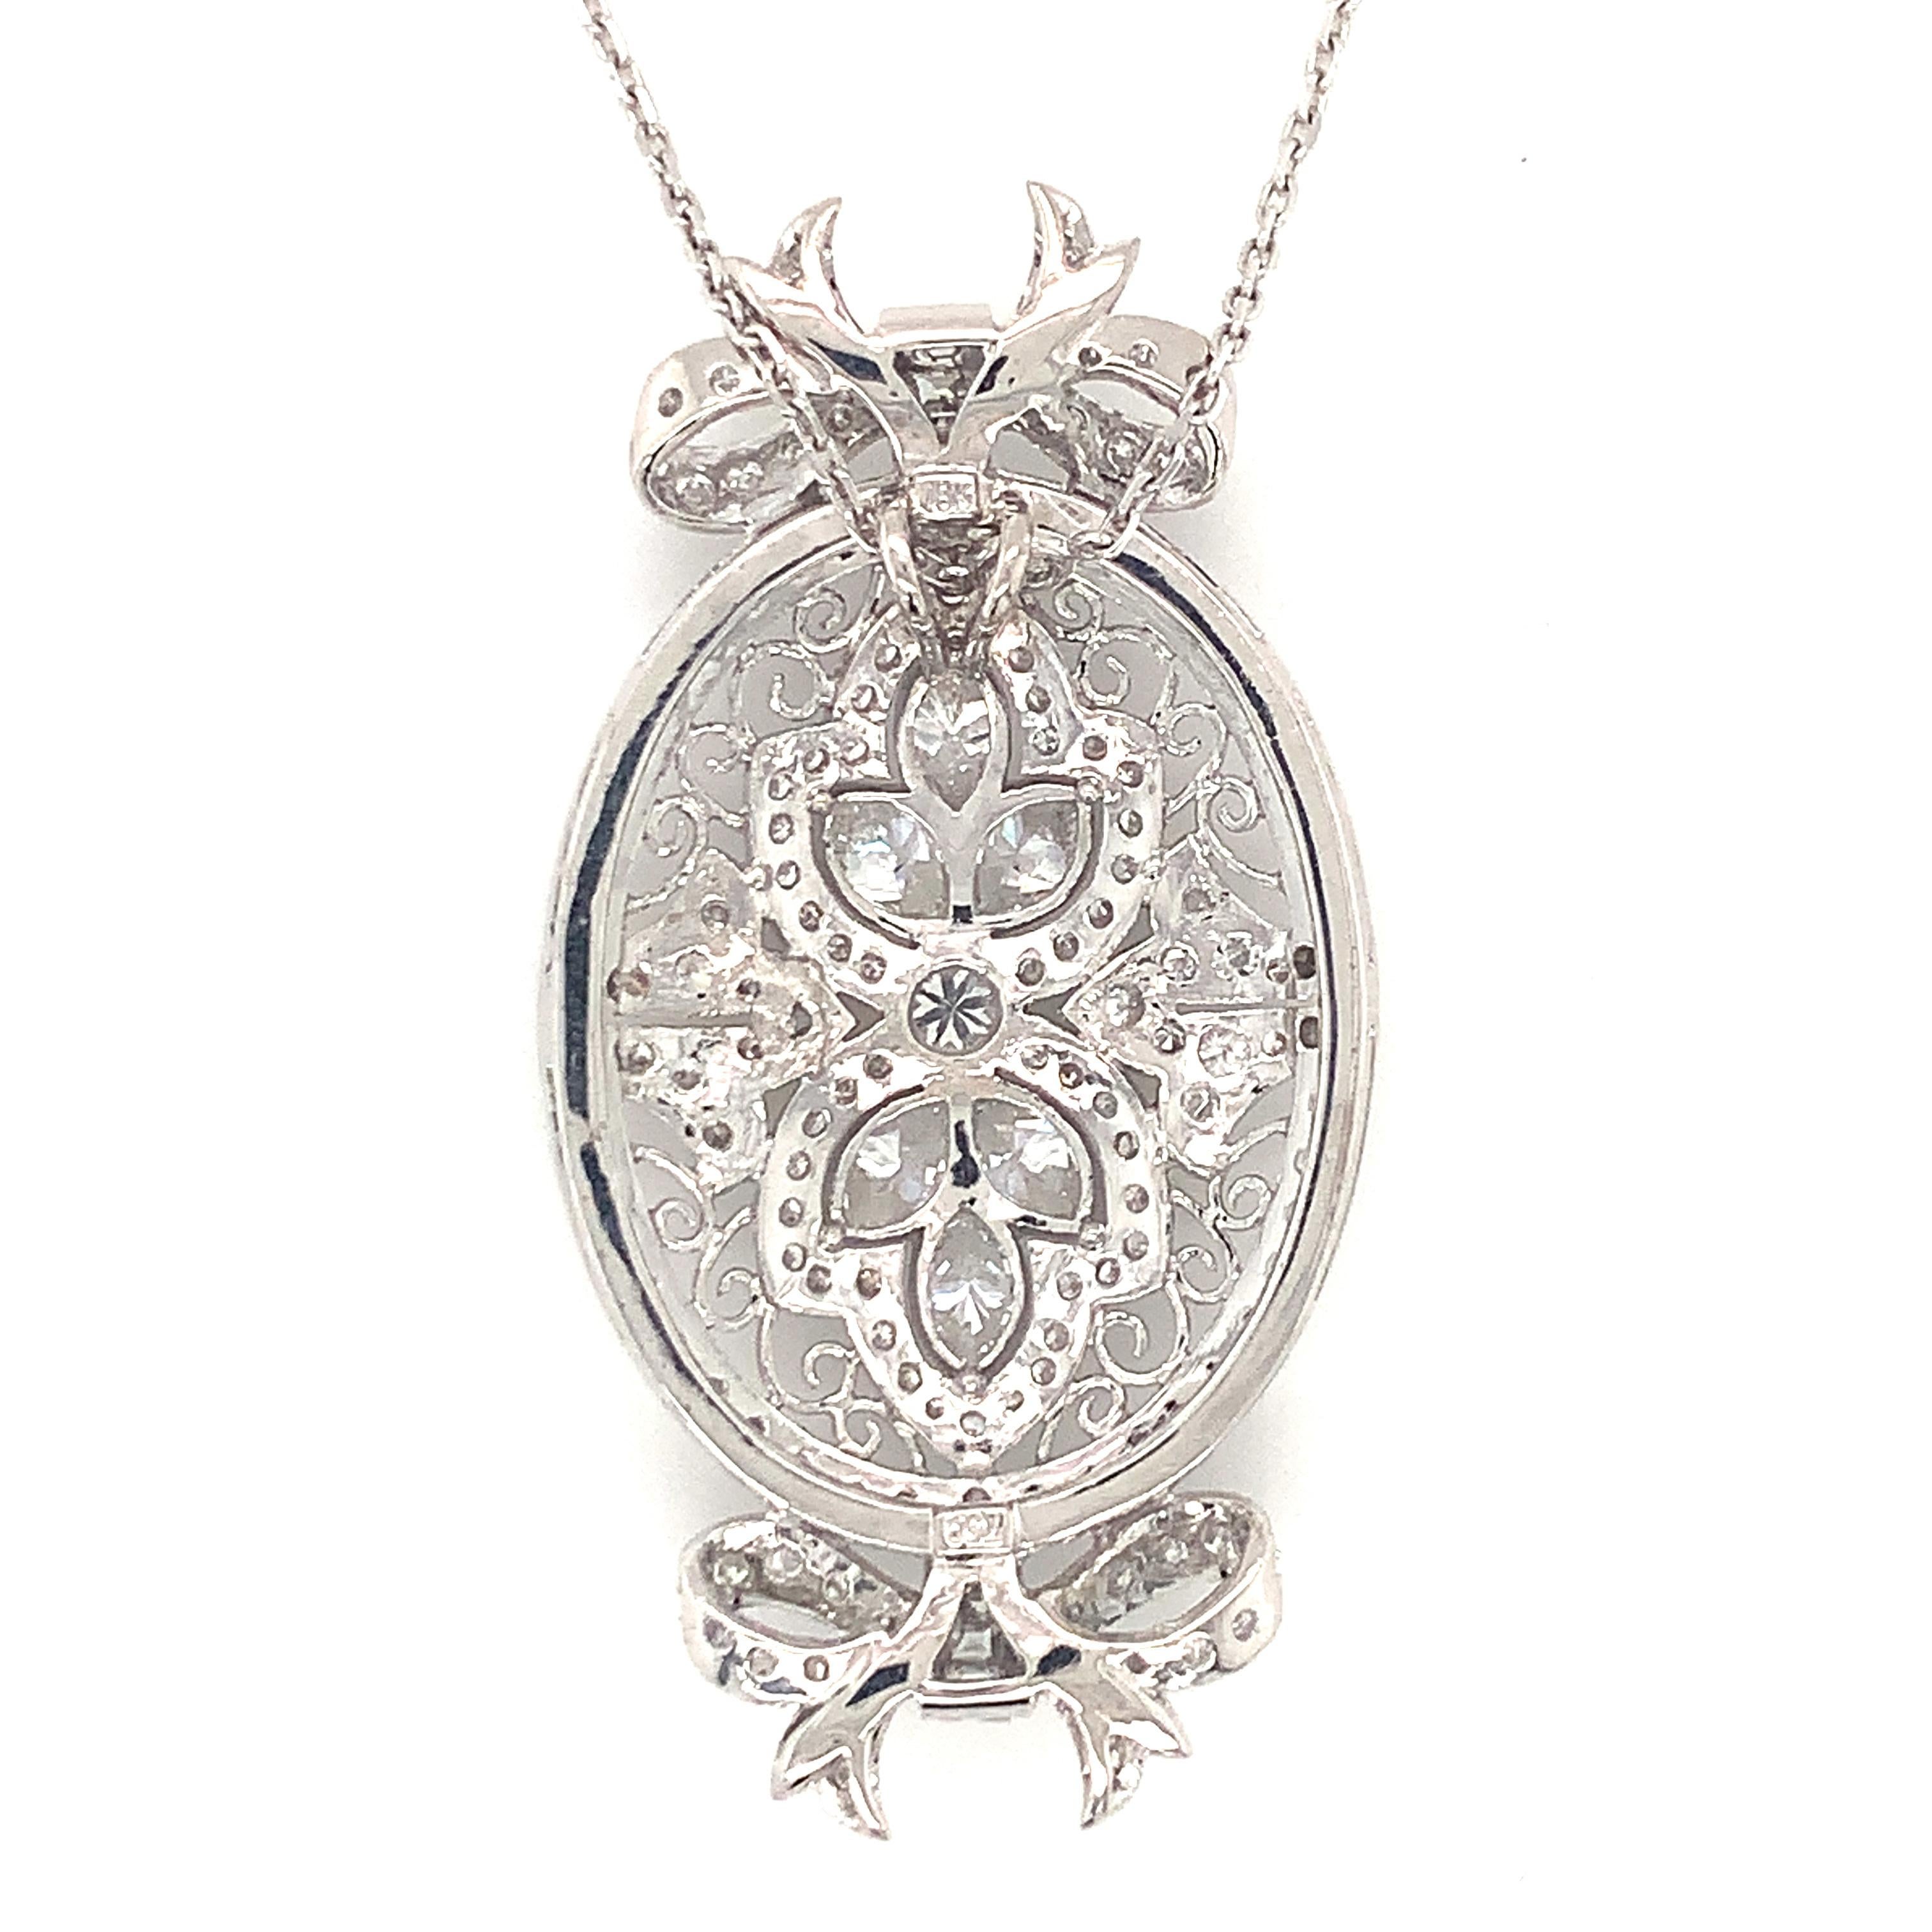 One mid-century diamond 18K white gold pendant featuring scroll work and a bow motif upon an oval-shaped pendant with 147 round brilliant cut, marquise brilliant, and baguette cut diamonds totaling 3 ct. Attached to a 14K white gold open link